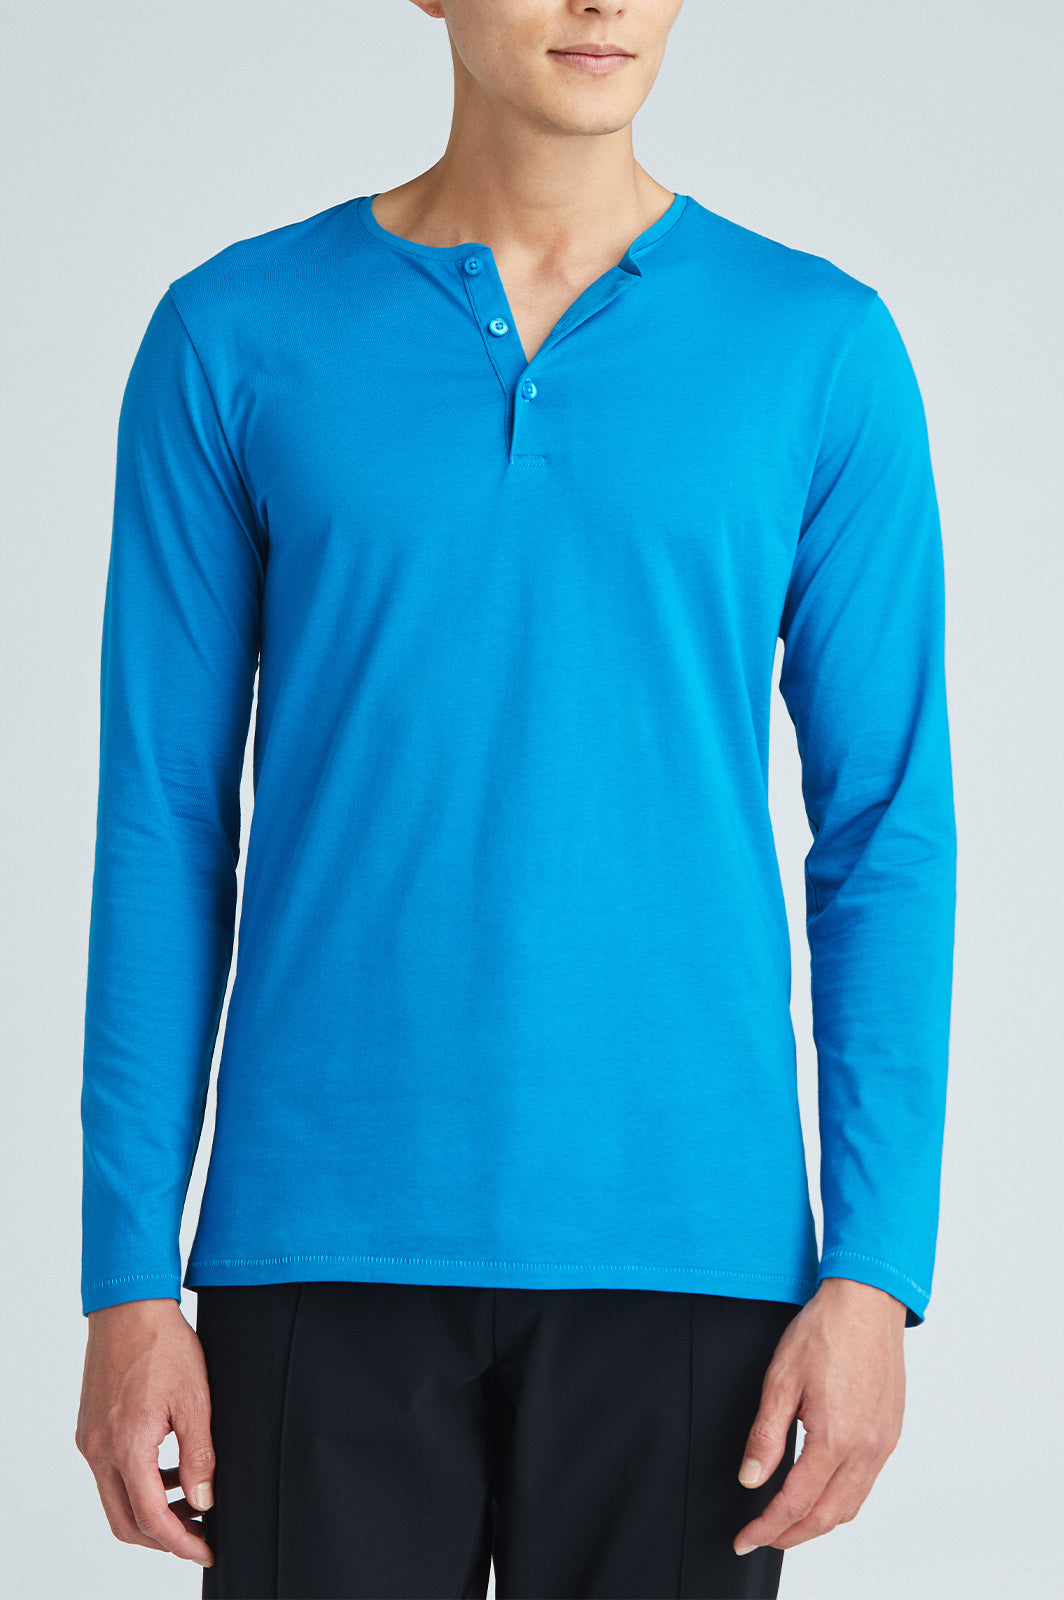 Sustainable Long Sleeve Teal Henley Shirt - State of Matter Apparel